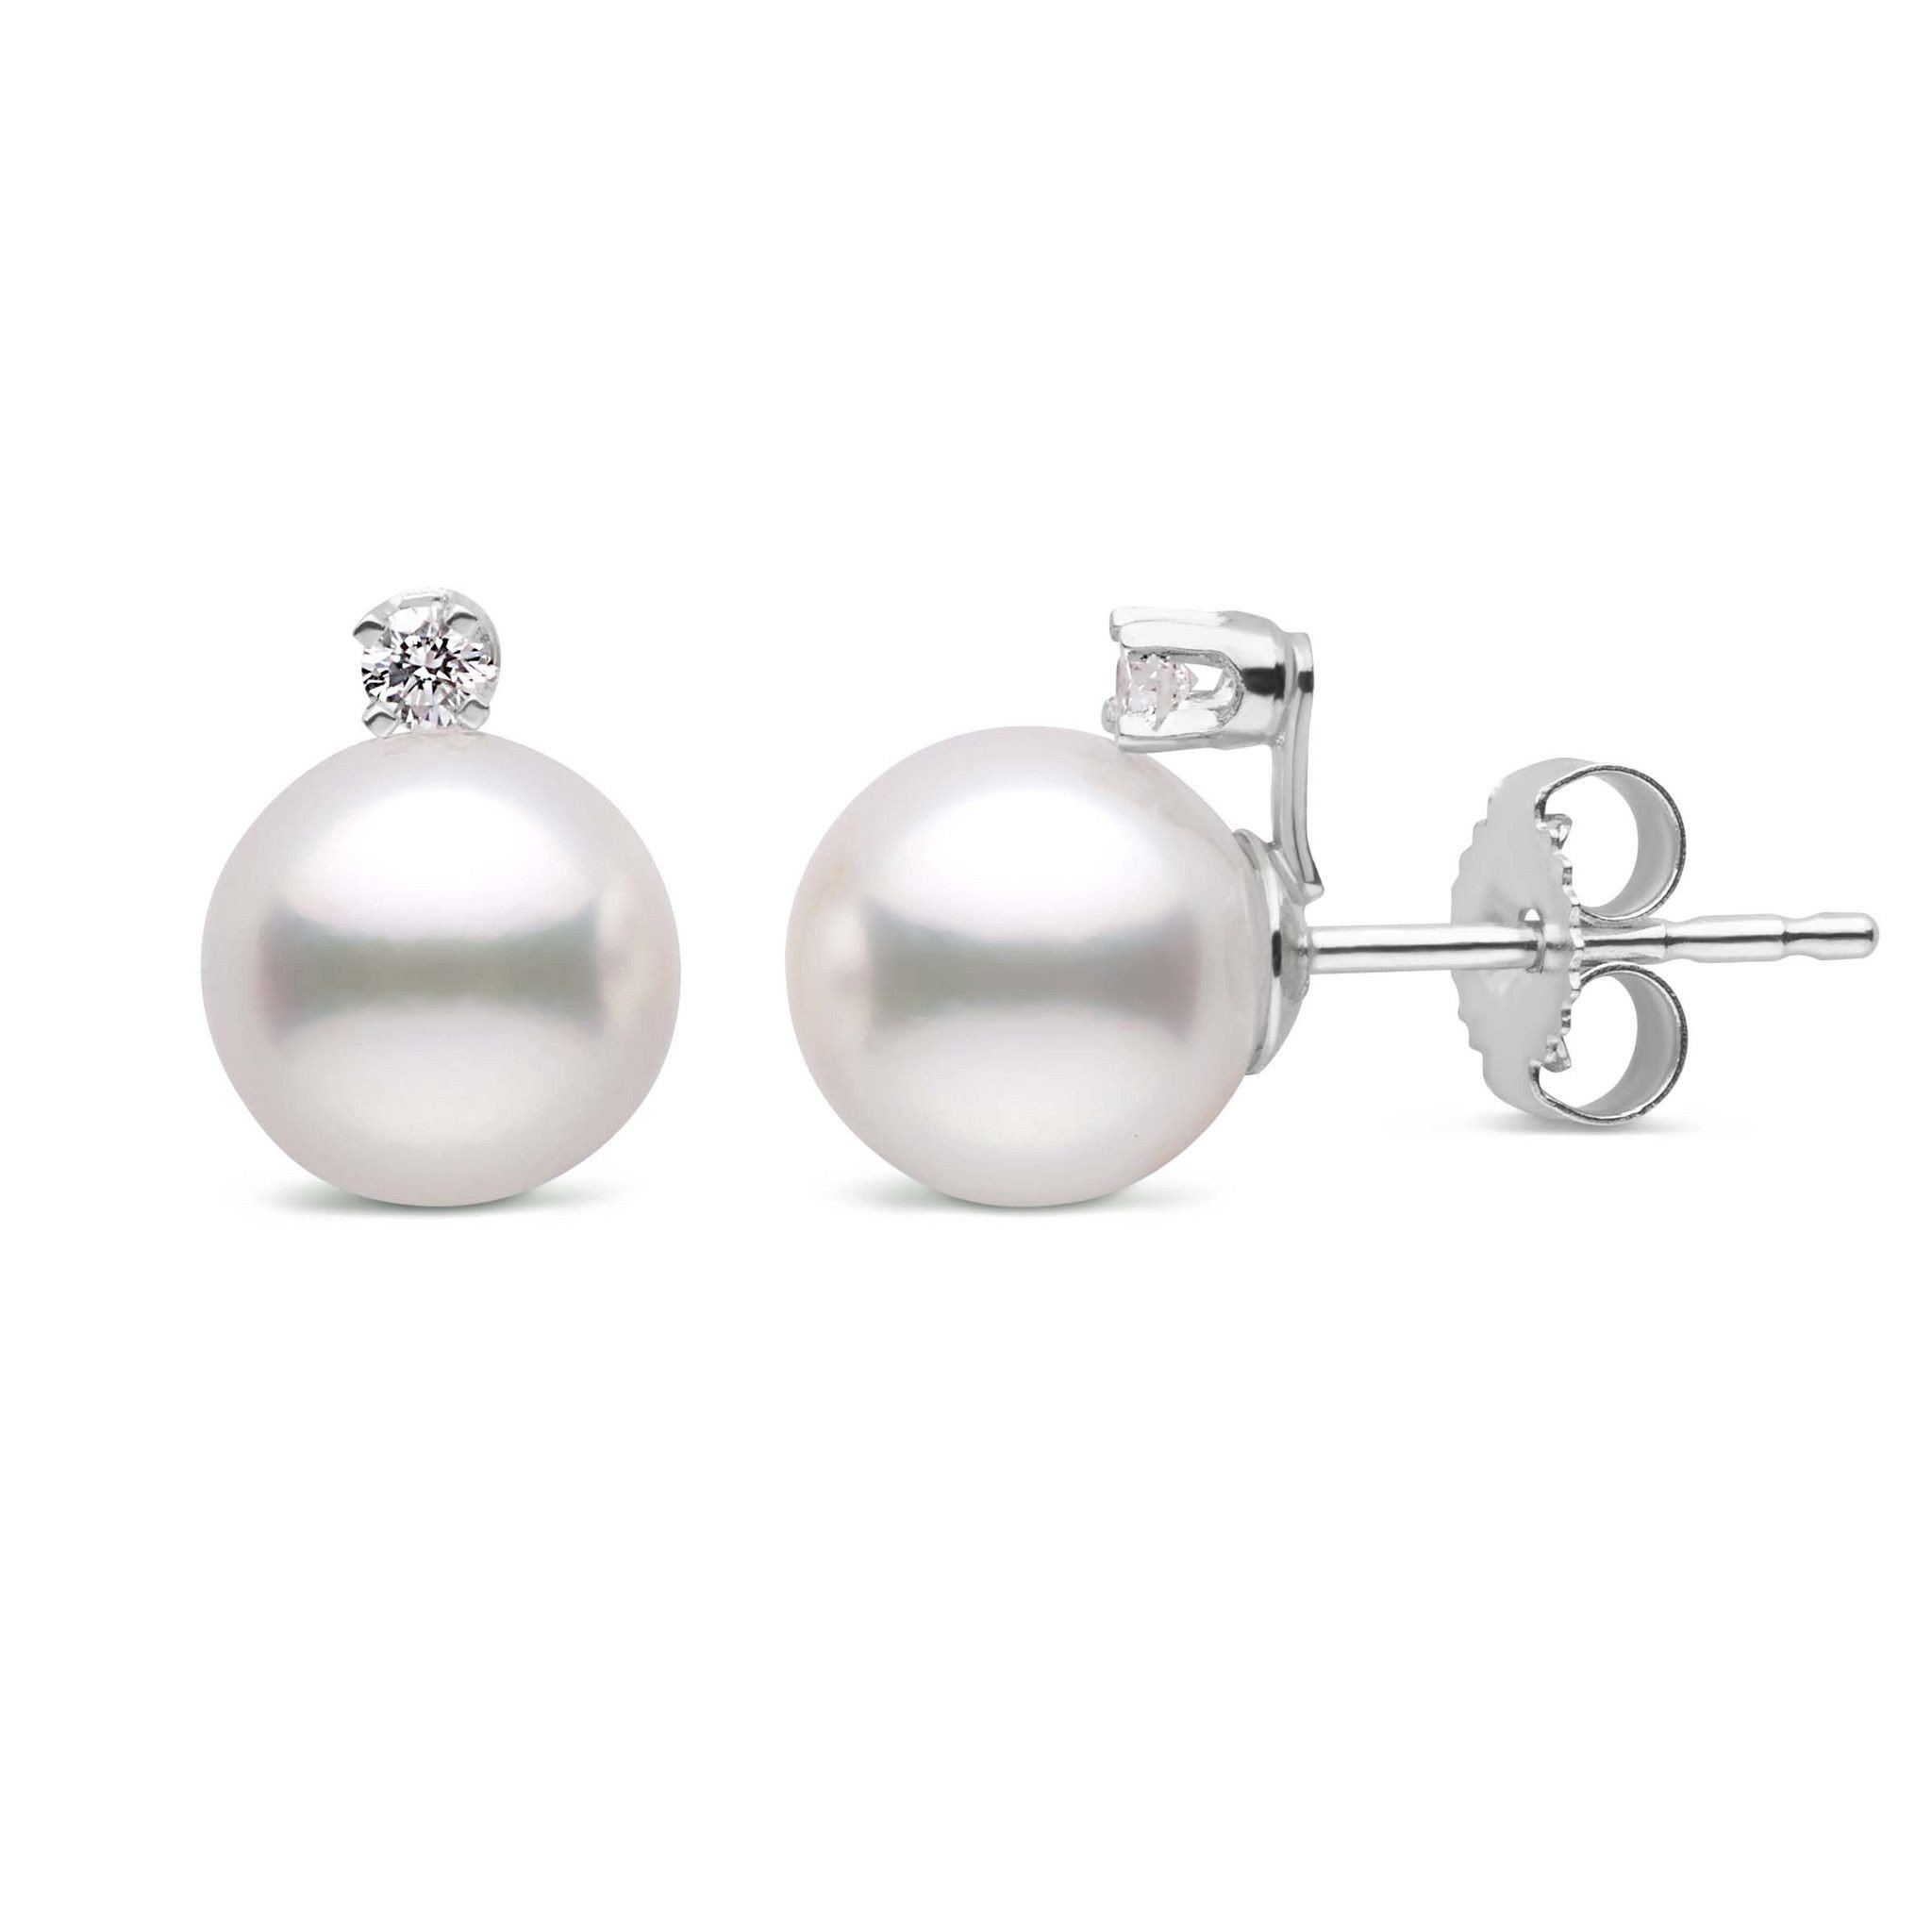 Starlight Collection 6.5-7.0 mm AAA Akoya Pearl and VS1-G Quality Diamond Earrings in white gold